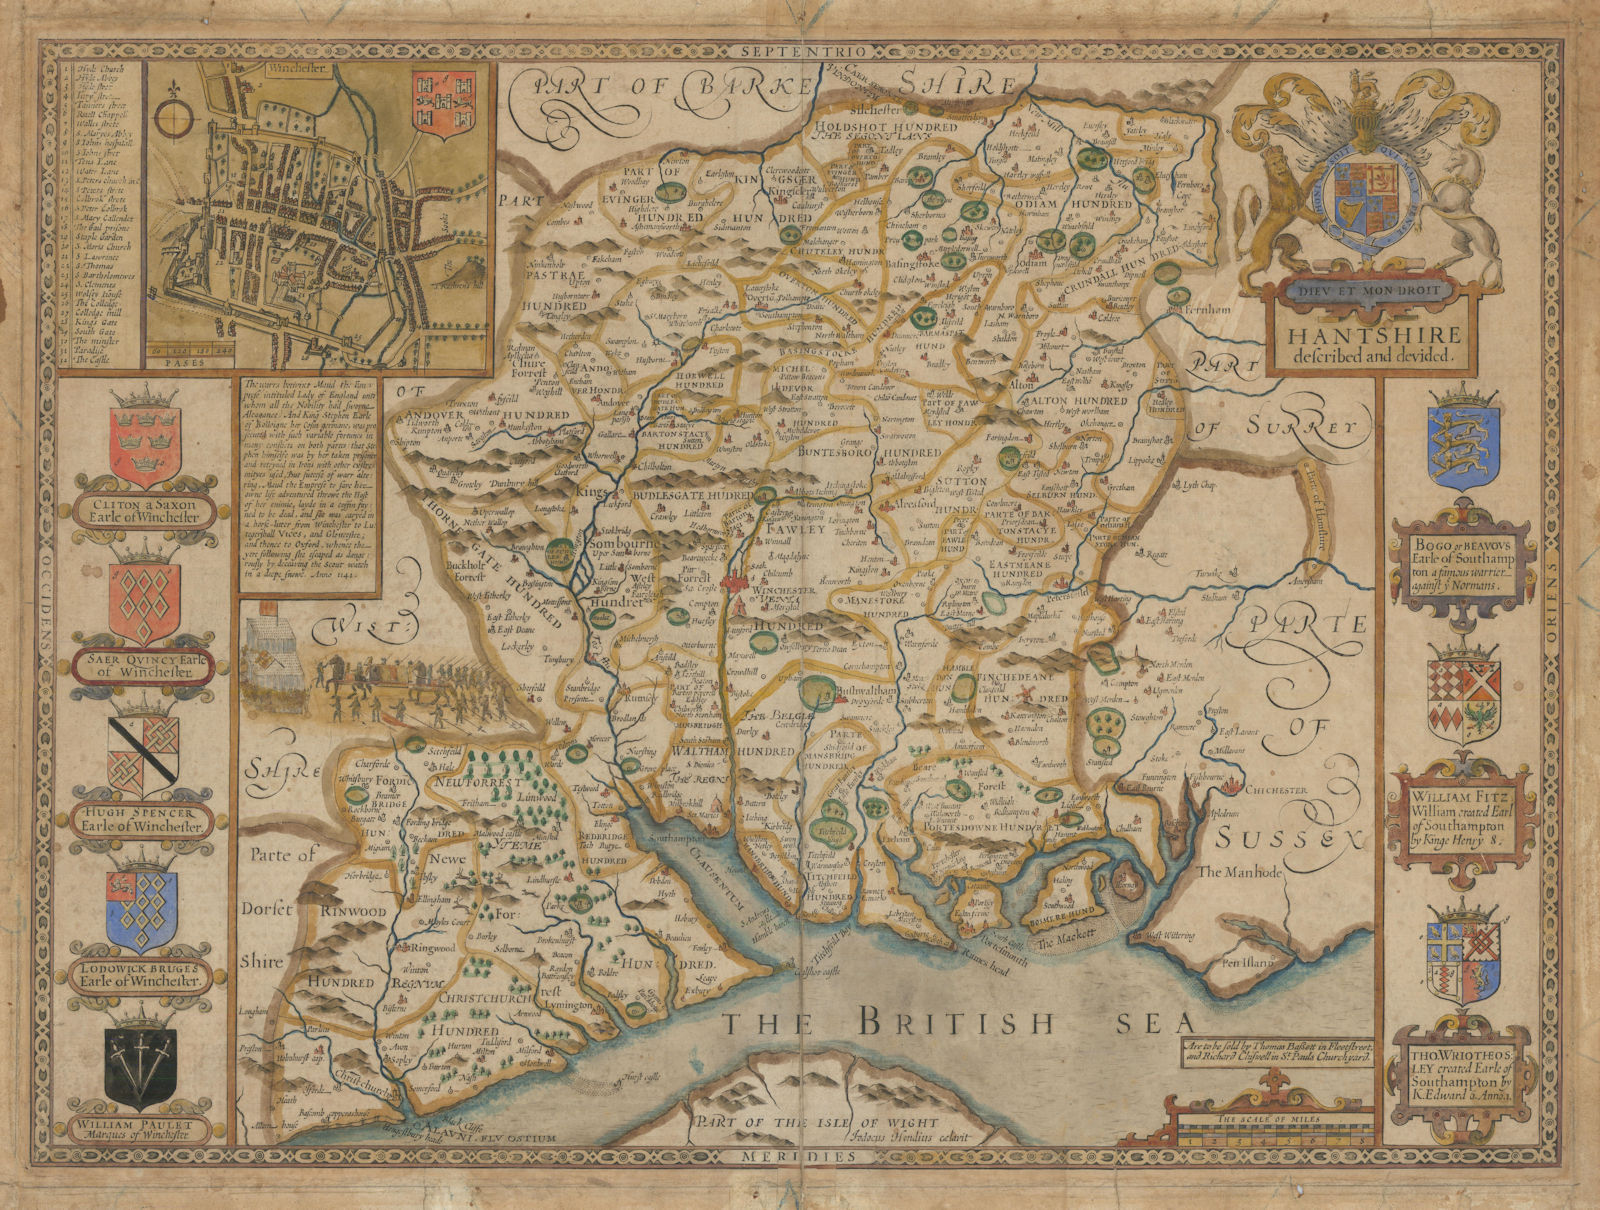 Hantshire. Hampshire county map by John Speed. Bassett/Chiswell edition 1676